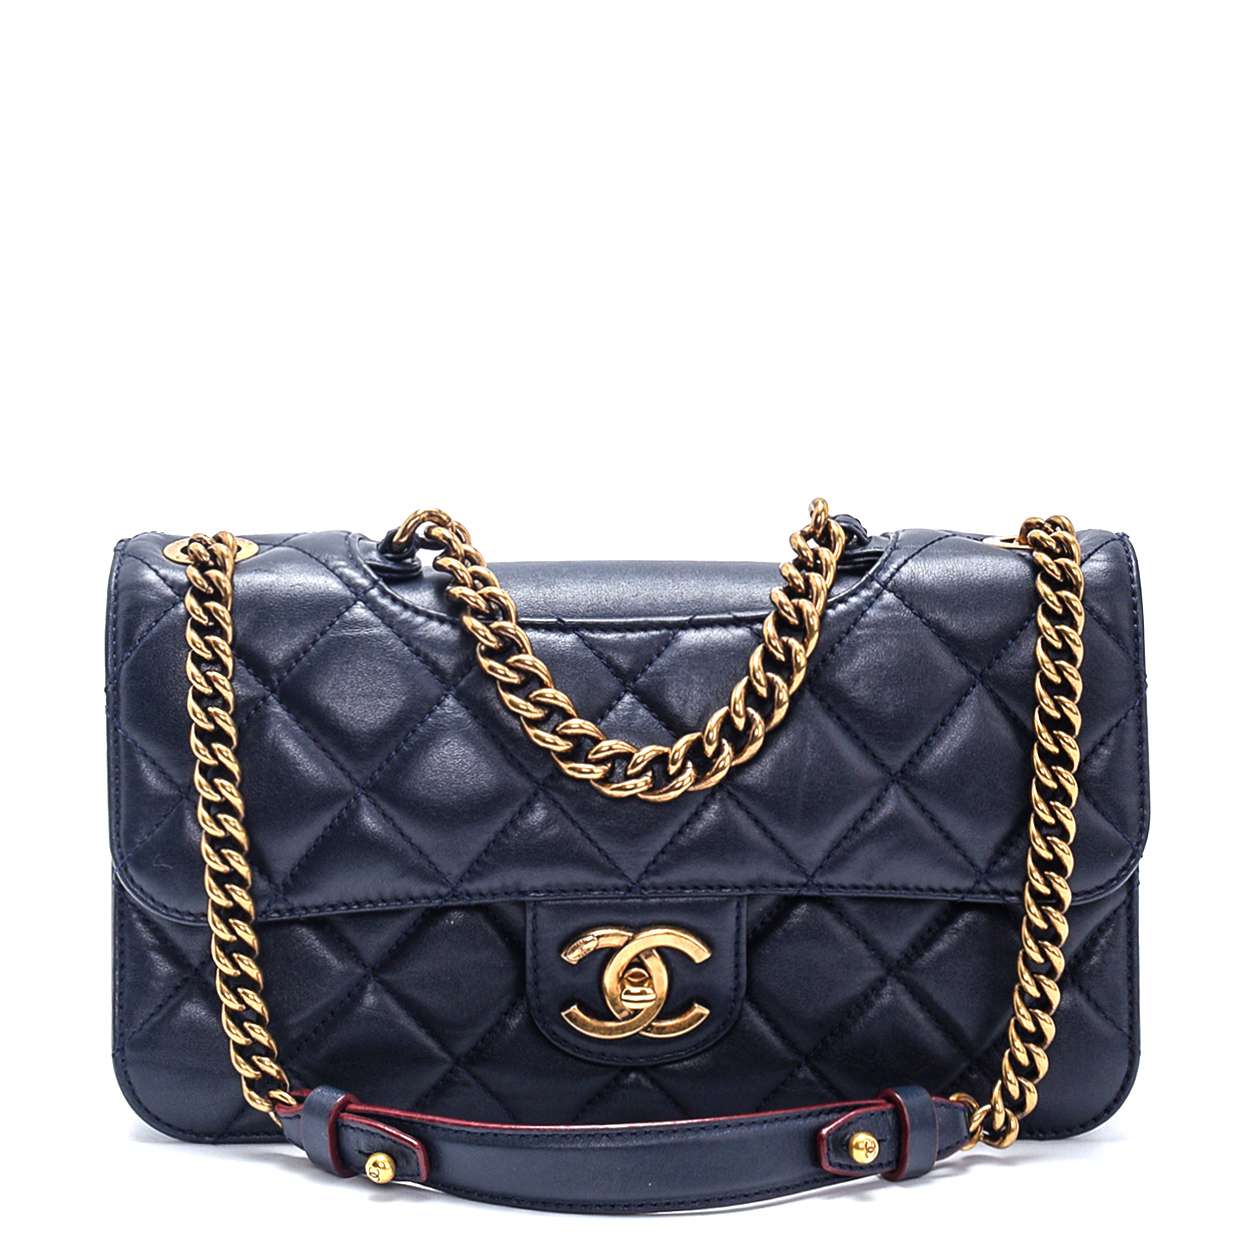 Chanel - Navy Blue Quilted Lambskin Leather Perfect Edge Jumbo Flap Bag